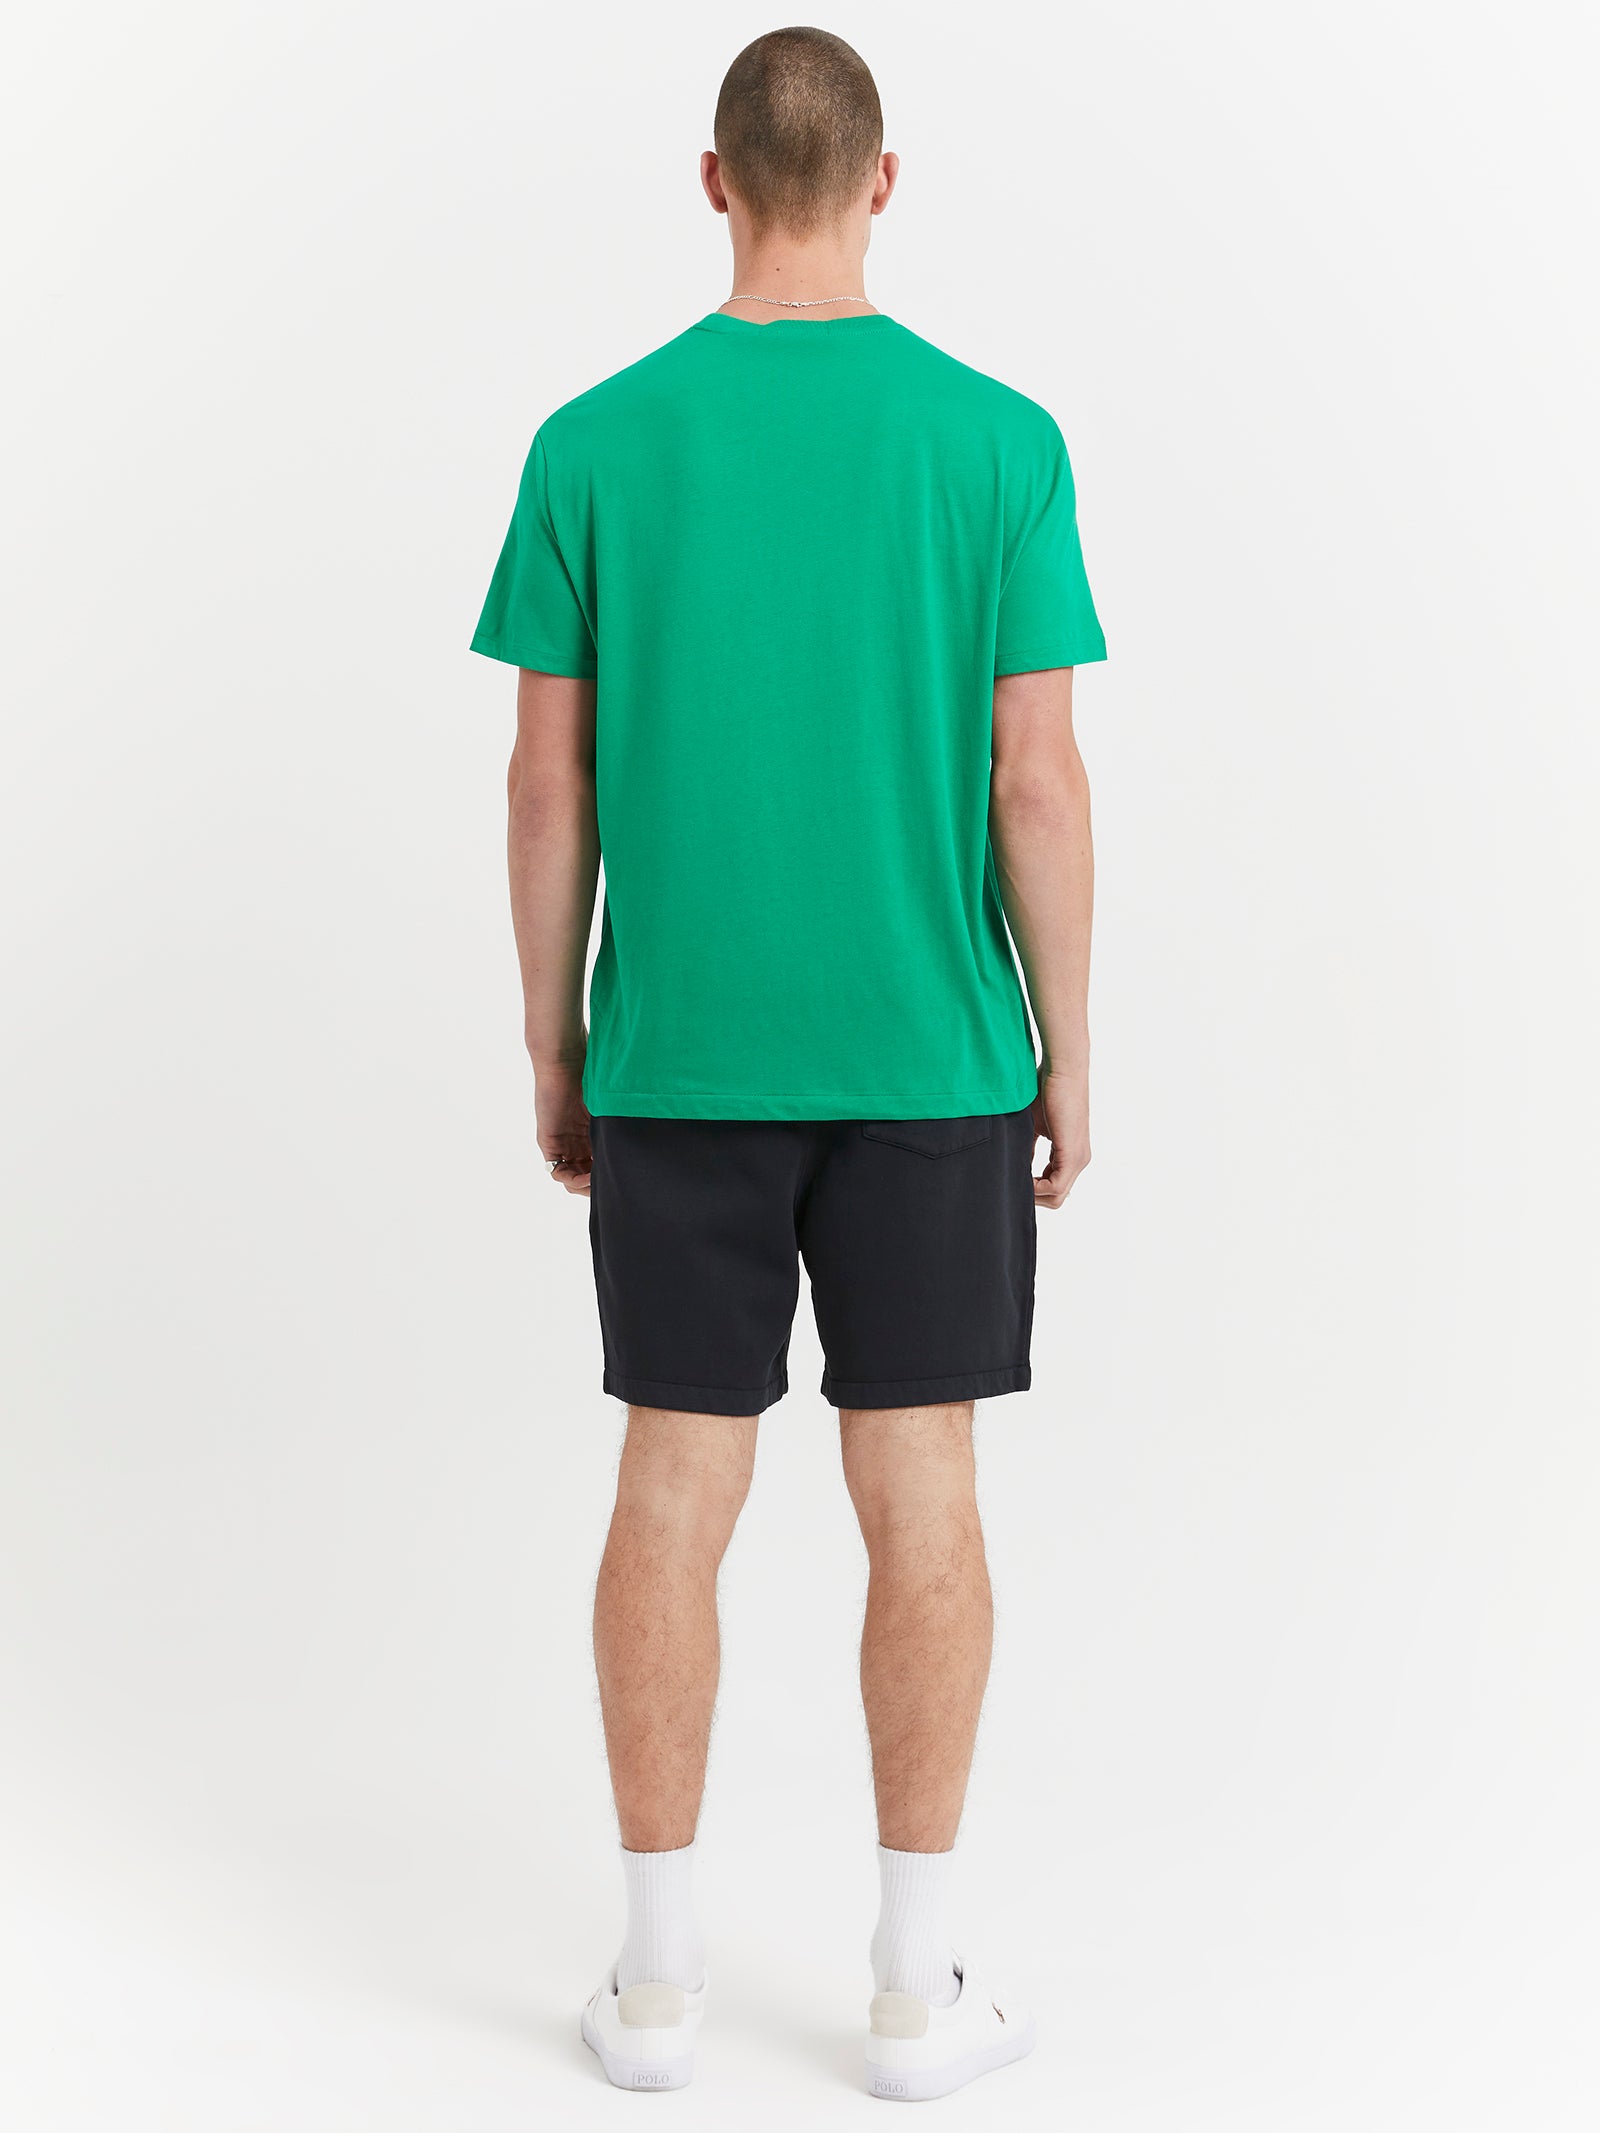 Classic Fit Polo Sport Jersey T-Shirt in Stem